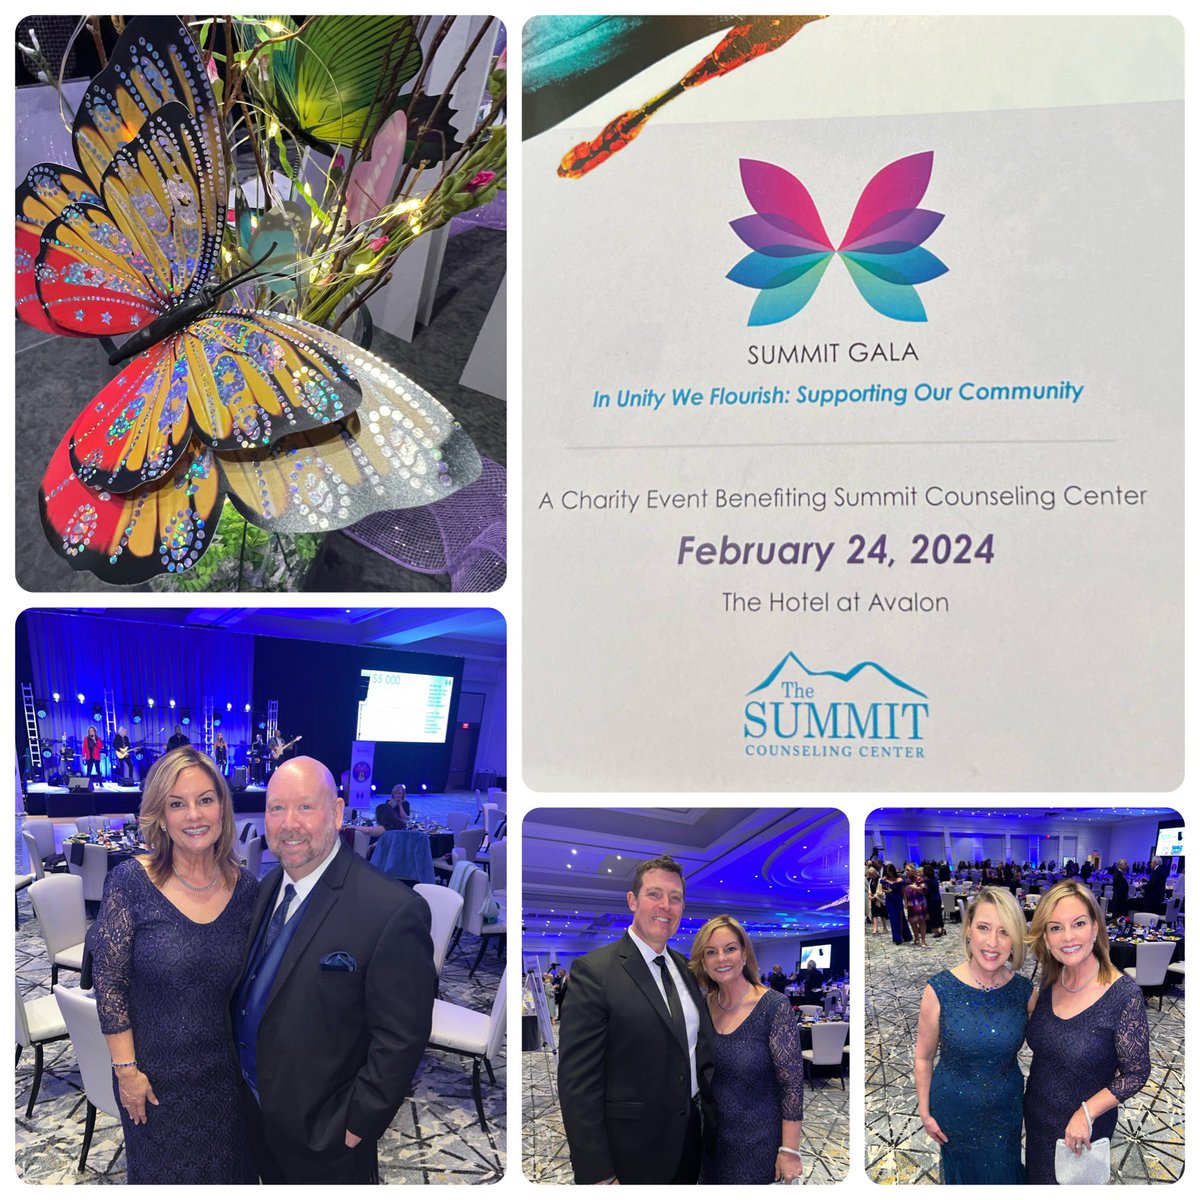 @SummitCoCtr & @FultonCoSchools have been partners in supporting students’ access to mental healthcare for many years & it is always an honor & pleasure to celebrate their work at the annual Summit Gala. I love this year’s theme: In unity we flourish: Supporting Our Community